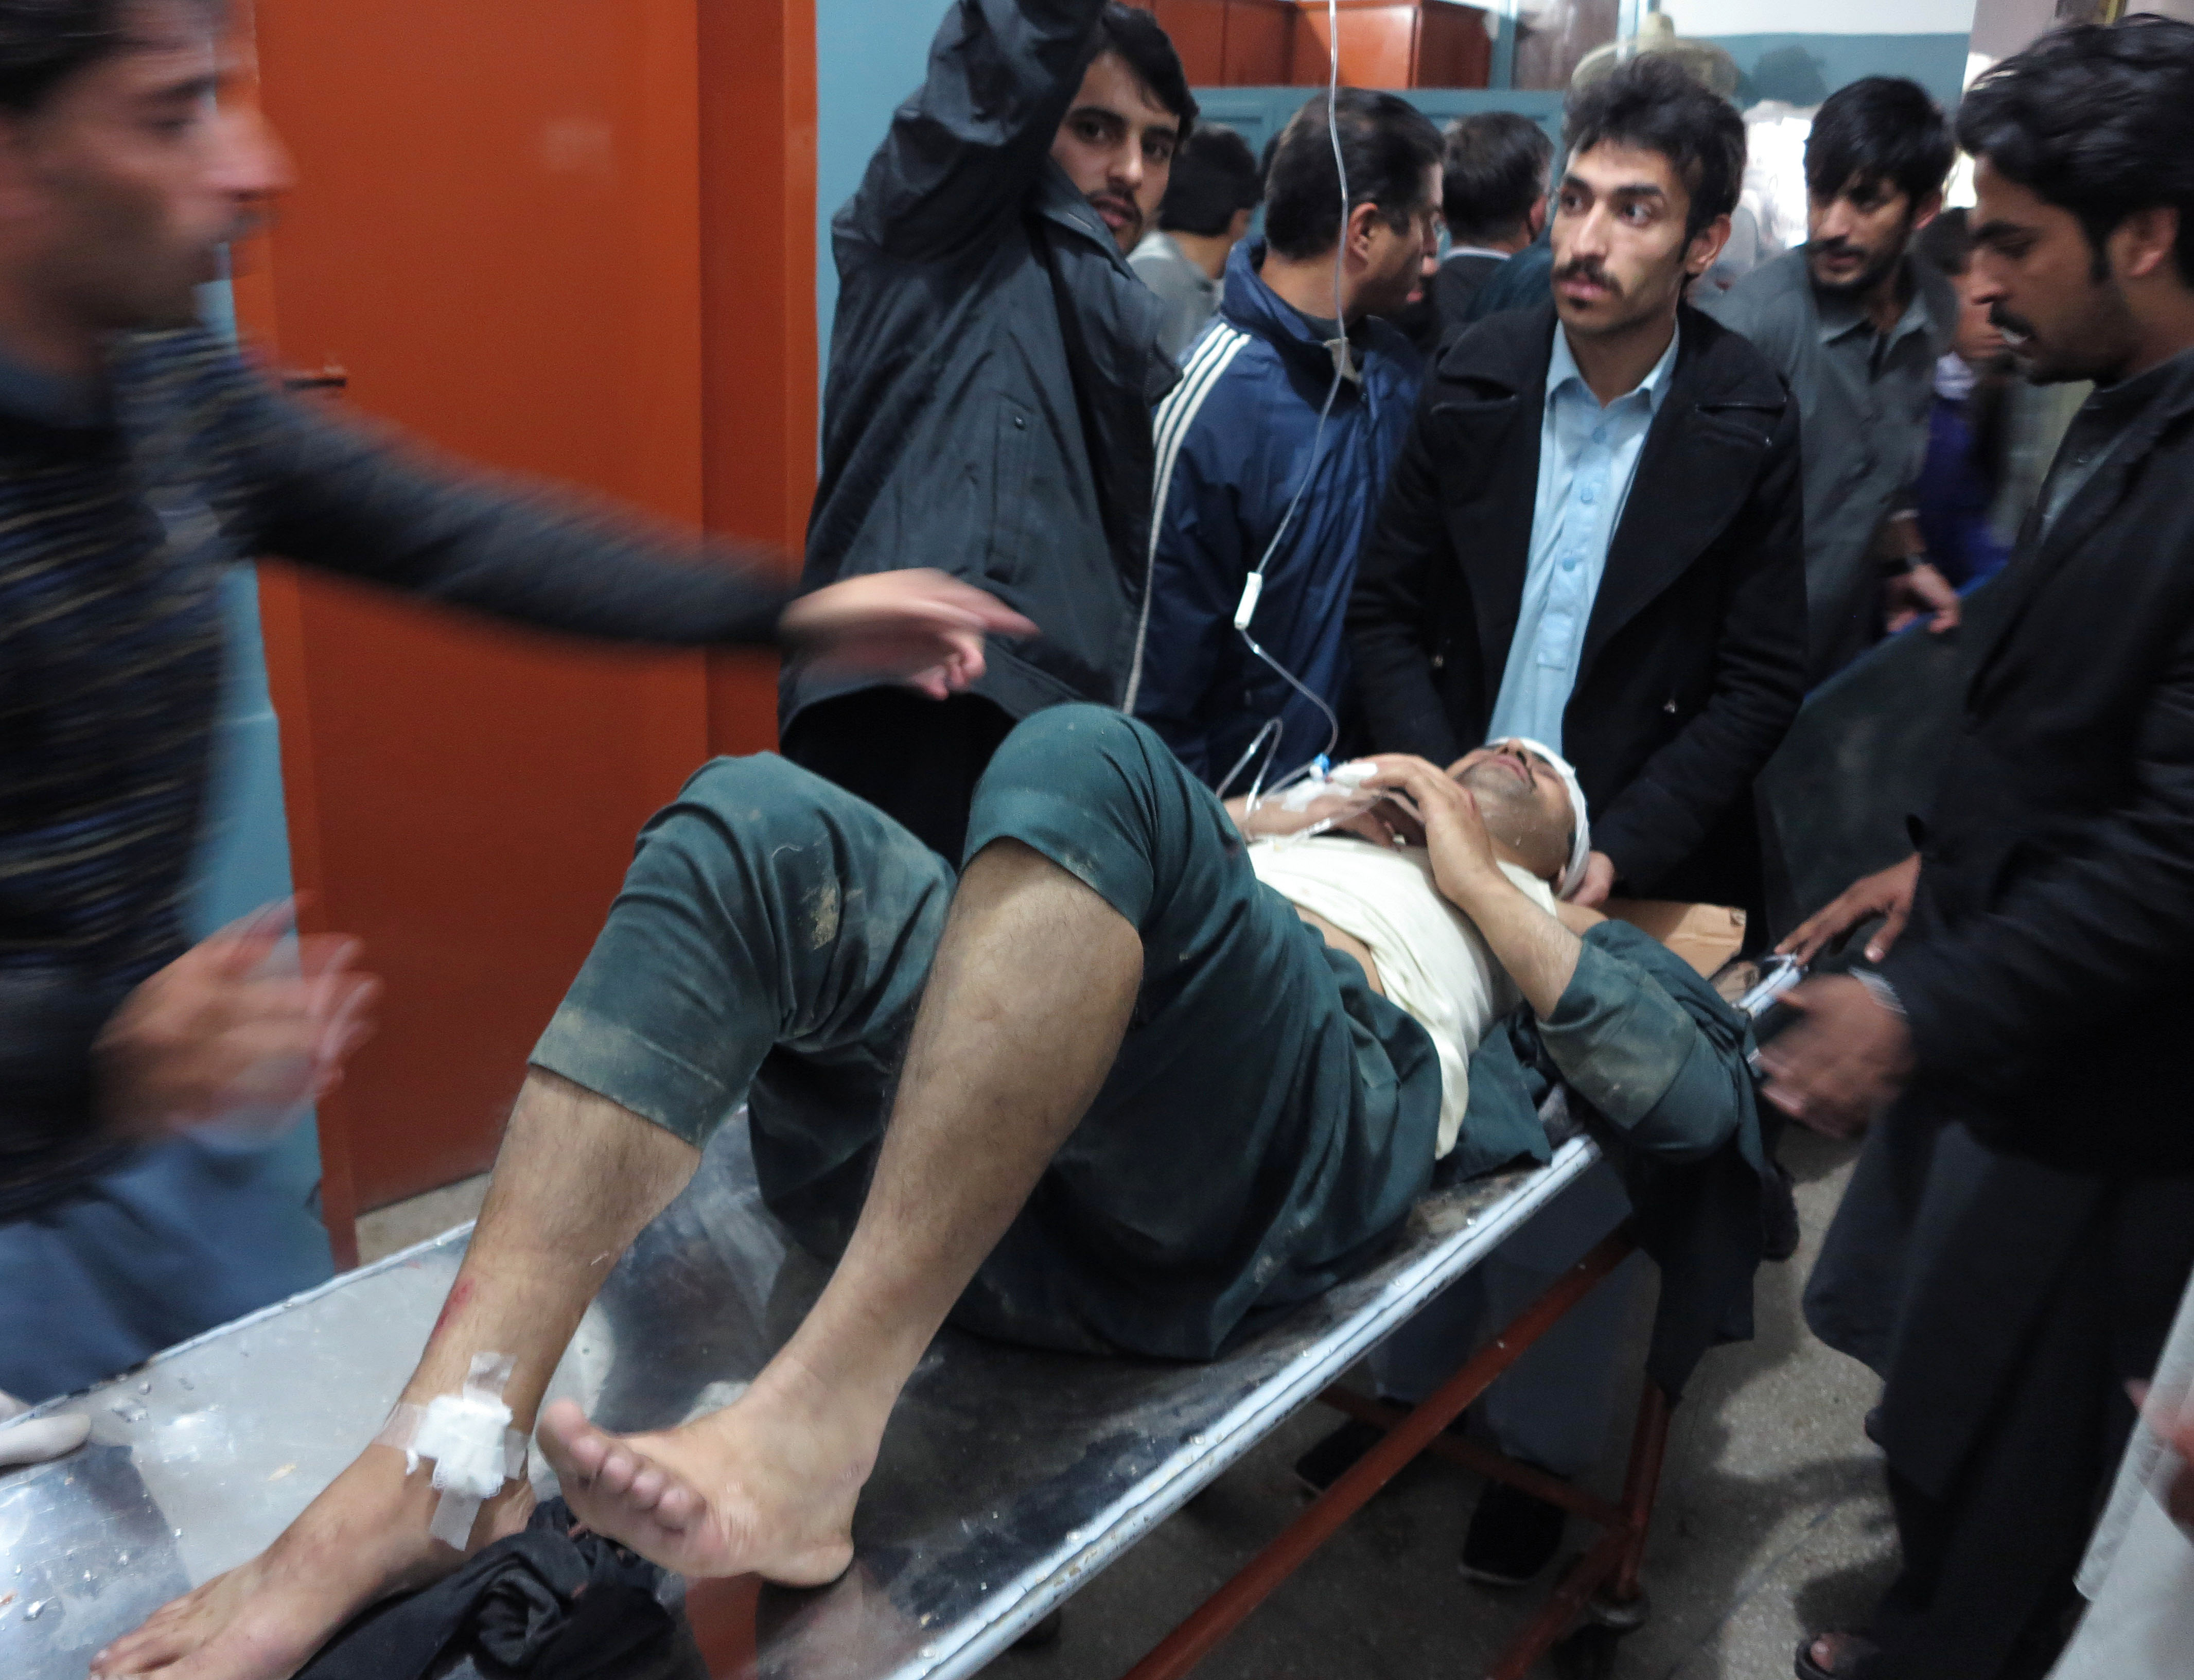 A patient is hauled into a hospital in Pakistan.